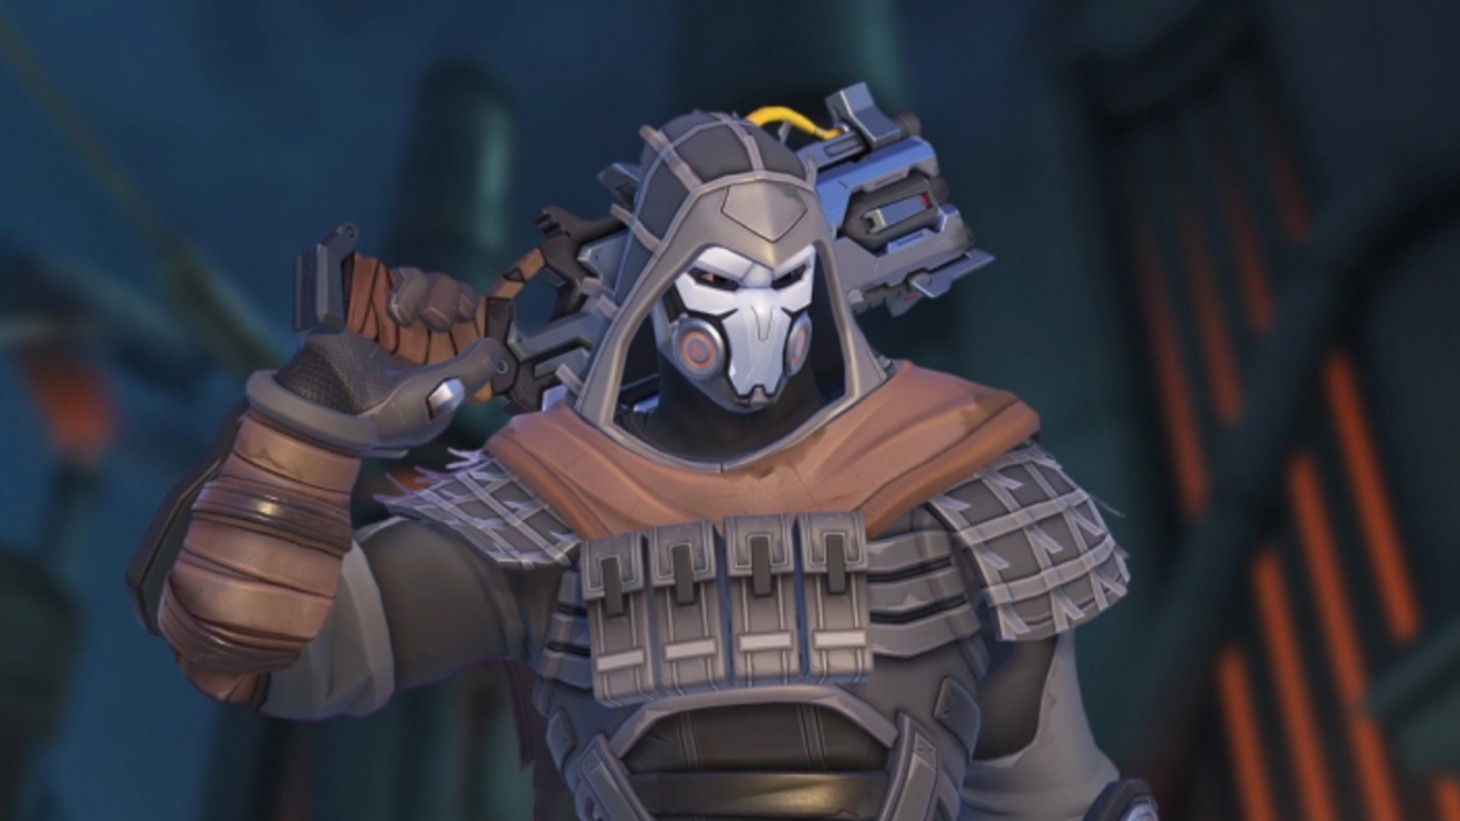 Overwatch: Reaper's Code Of Violence Challenge Is Now Live - Game